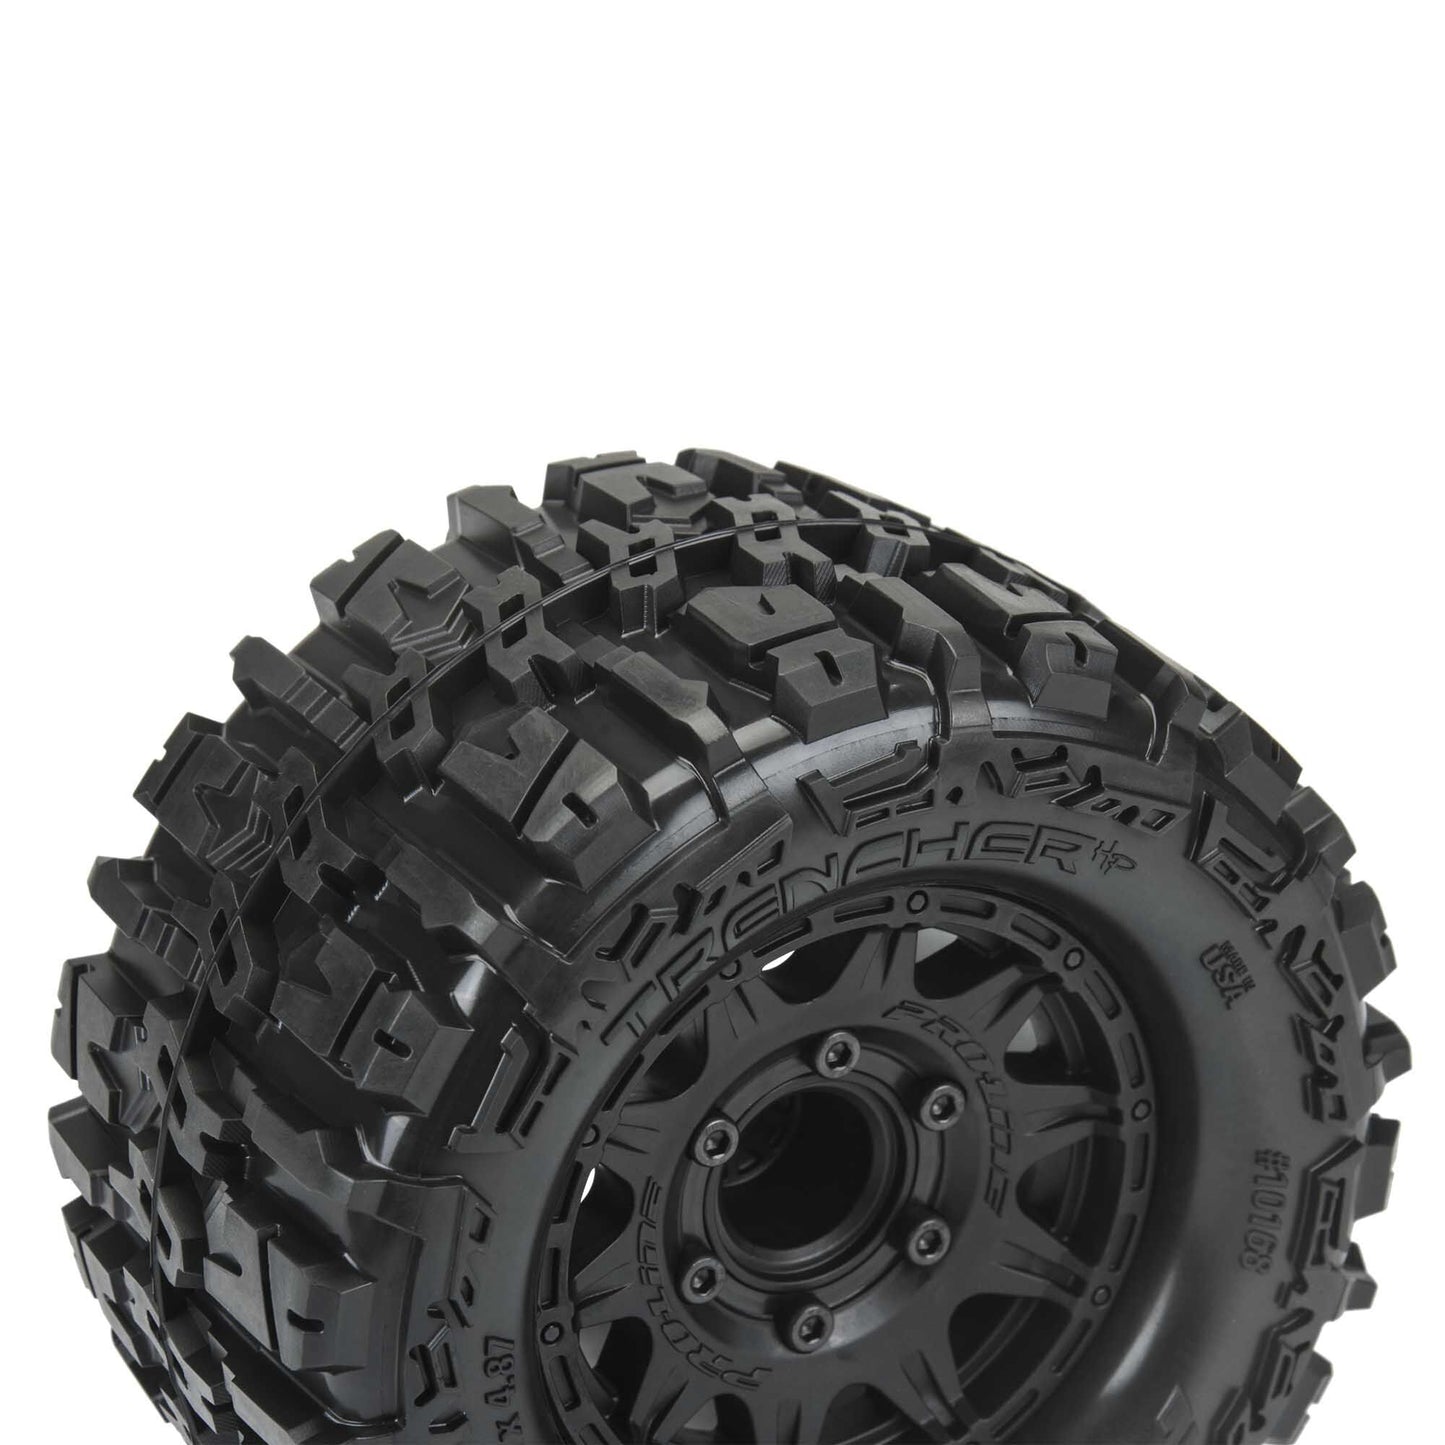 1/10 Pro-Line Trencher HP BELTED F/R 2.8" MT Tires Mounted 12mm Blk Raid (2)